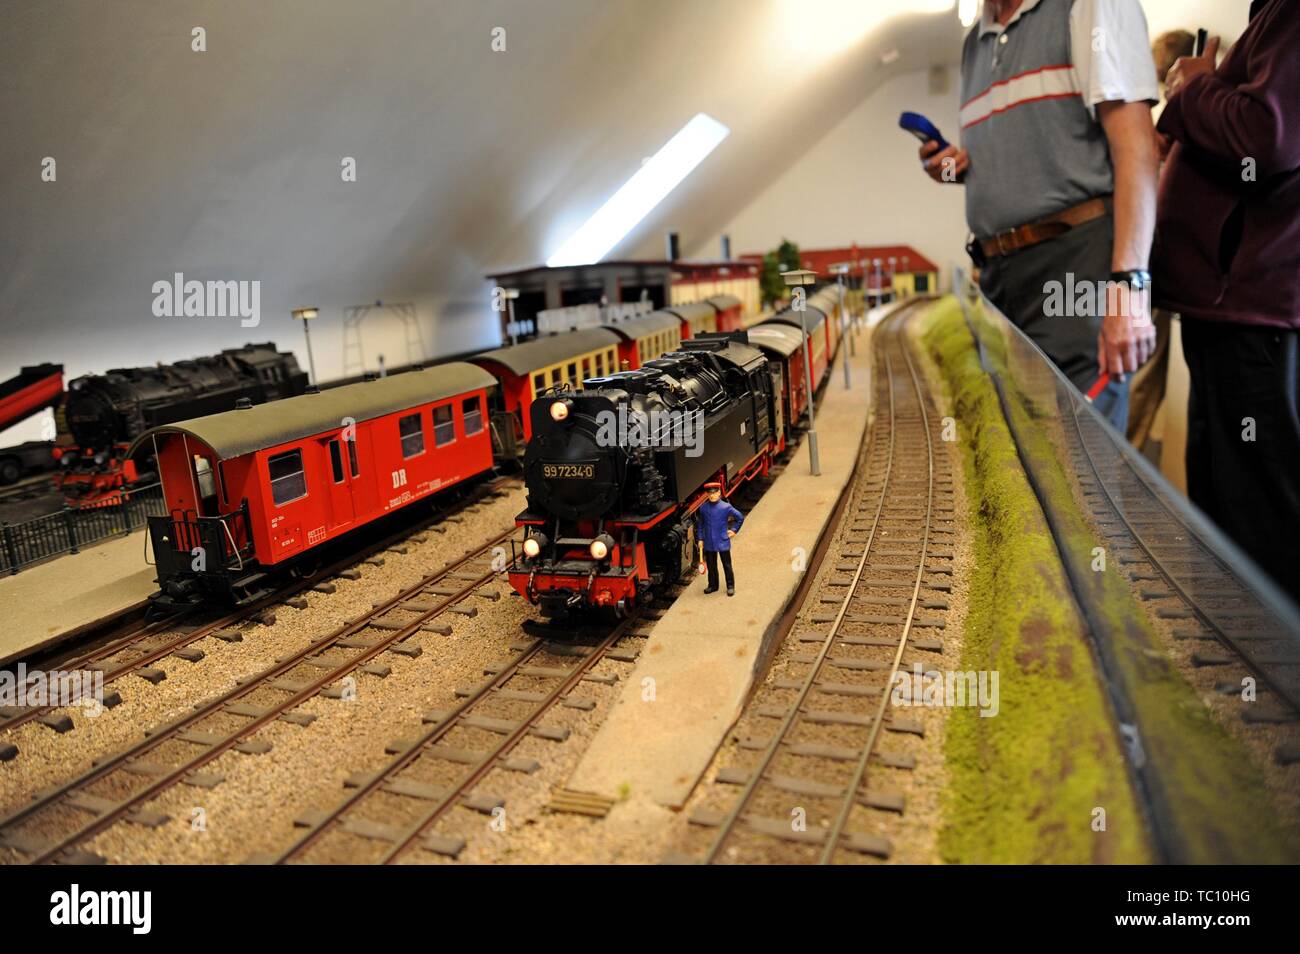 A G gauge model railway based on the Hartz railway Germany, in the station building at the Chasewater Light Railway, Cannock Stock Photo